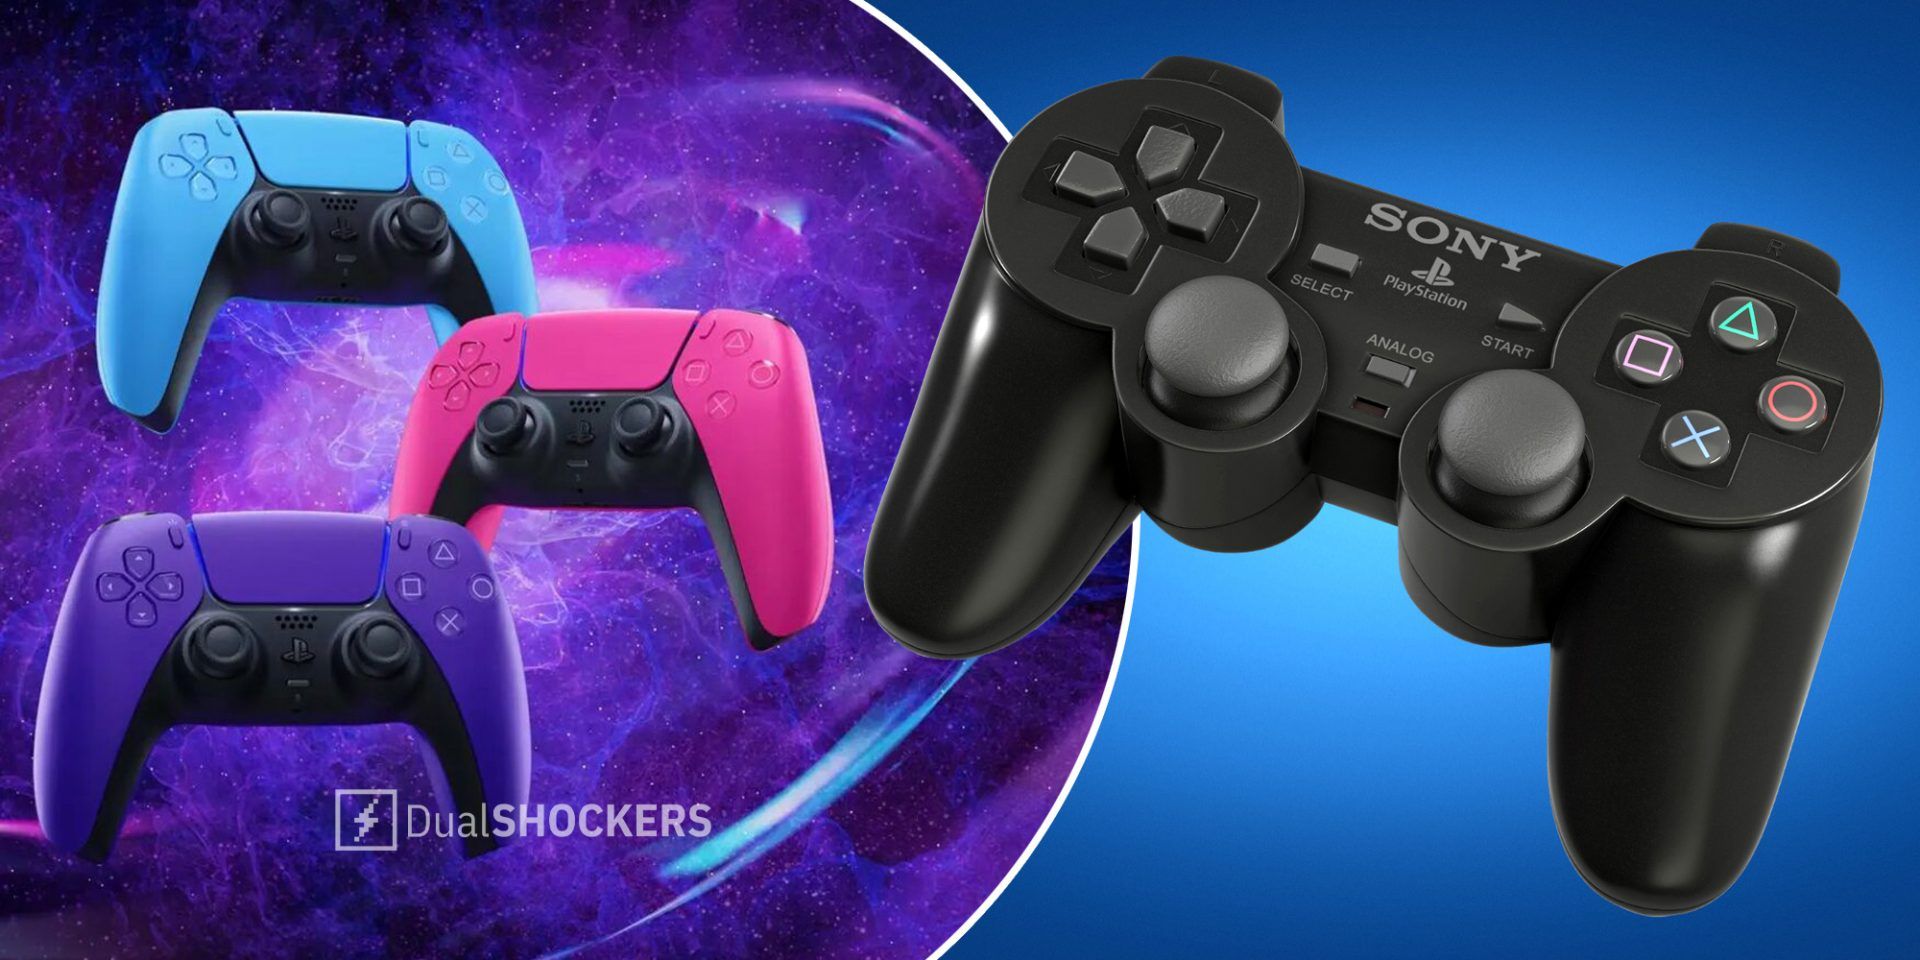 Pushing Buttons: After a decade of PlayStation dominance, the next